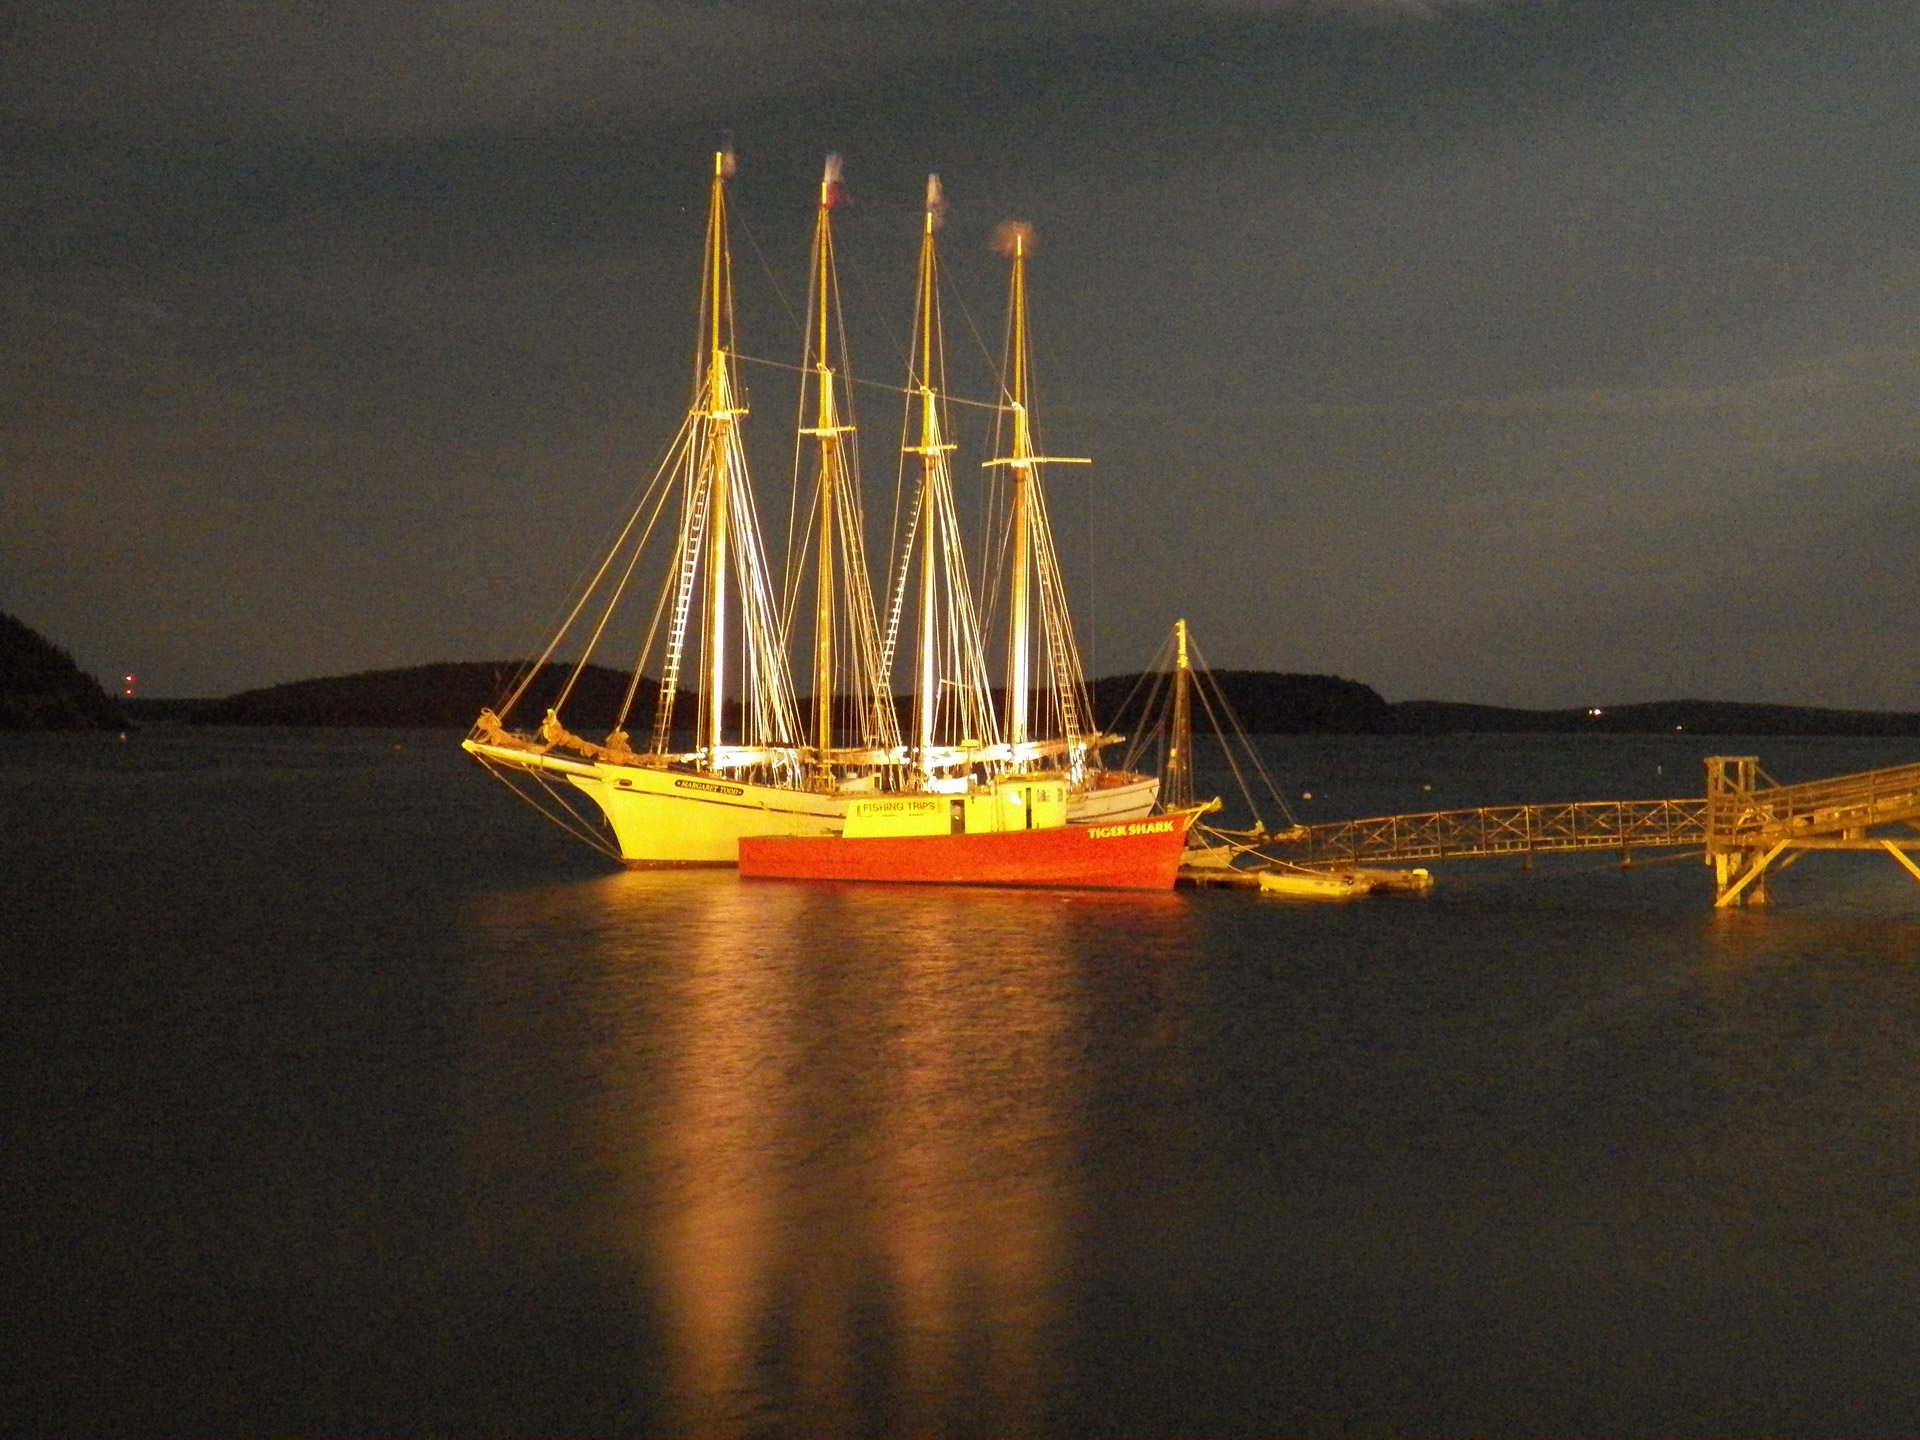 photo of a four masted schooner in moonlight